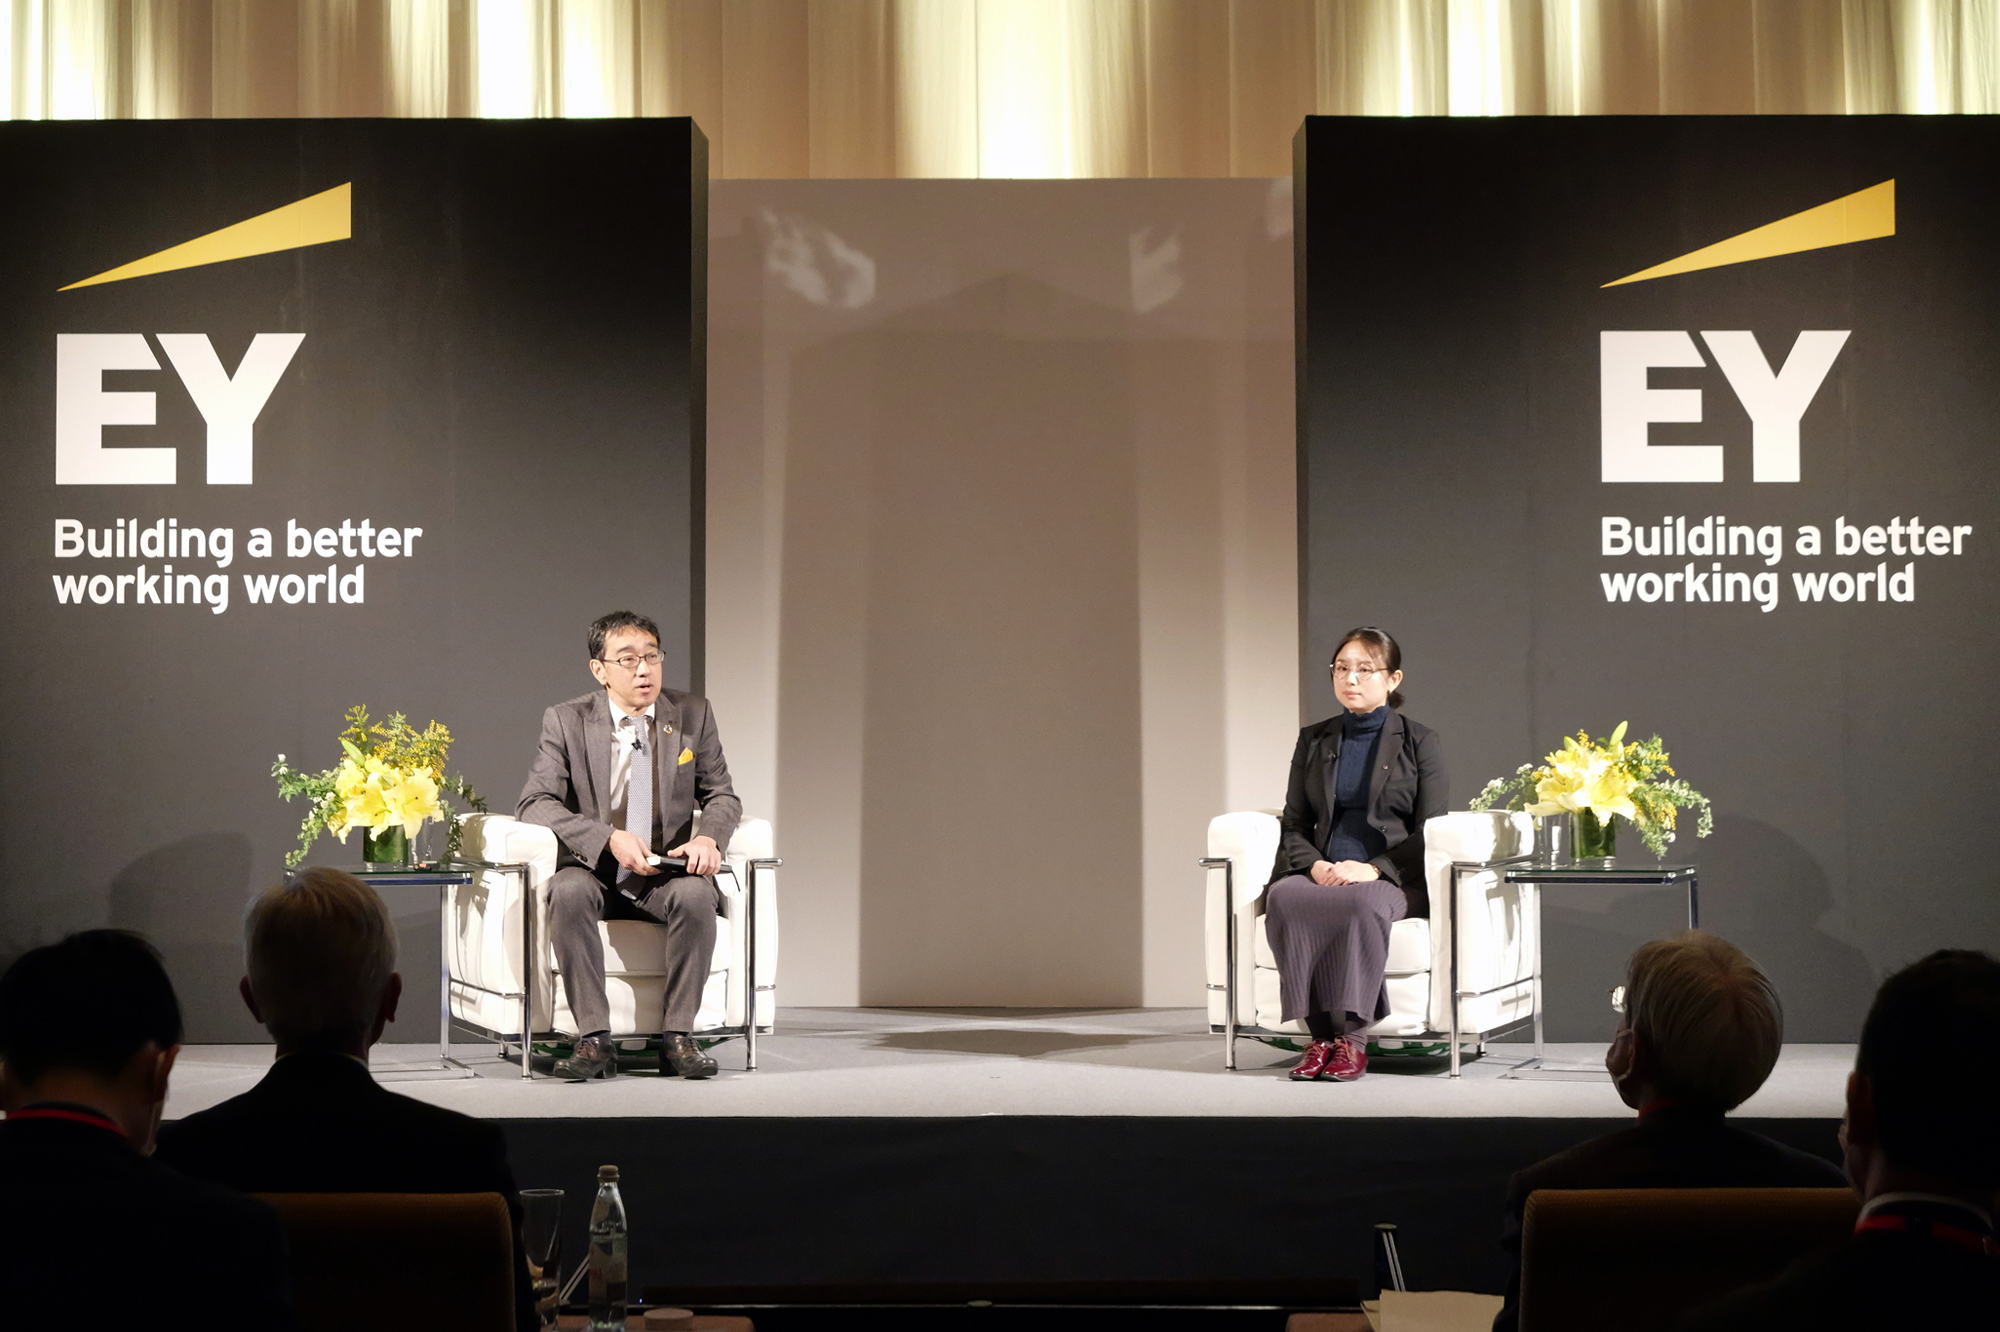 EYのパーパス経営「Building a better working world ～より良い社会の構築を目指して」